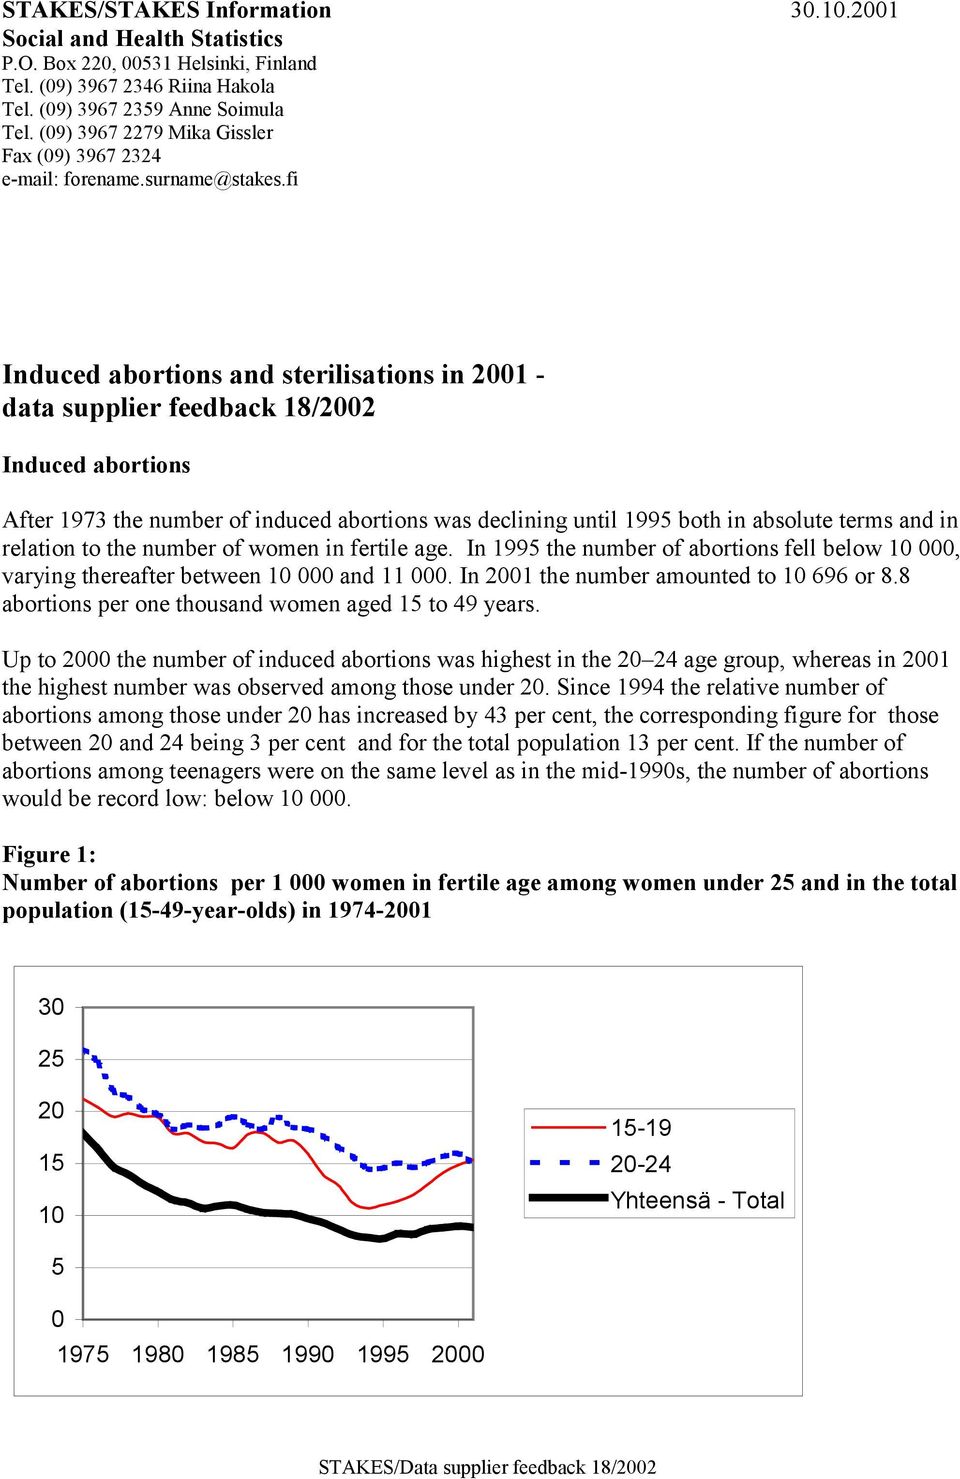 fi Induced abortions and sterilisations in 2001 - data supplier feedback 18/2002 Induced abortions After 1973 the number of induced abortions was declining until 1995 both in absolute terms and in